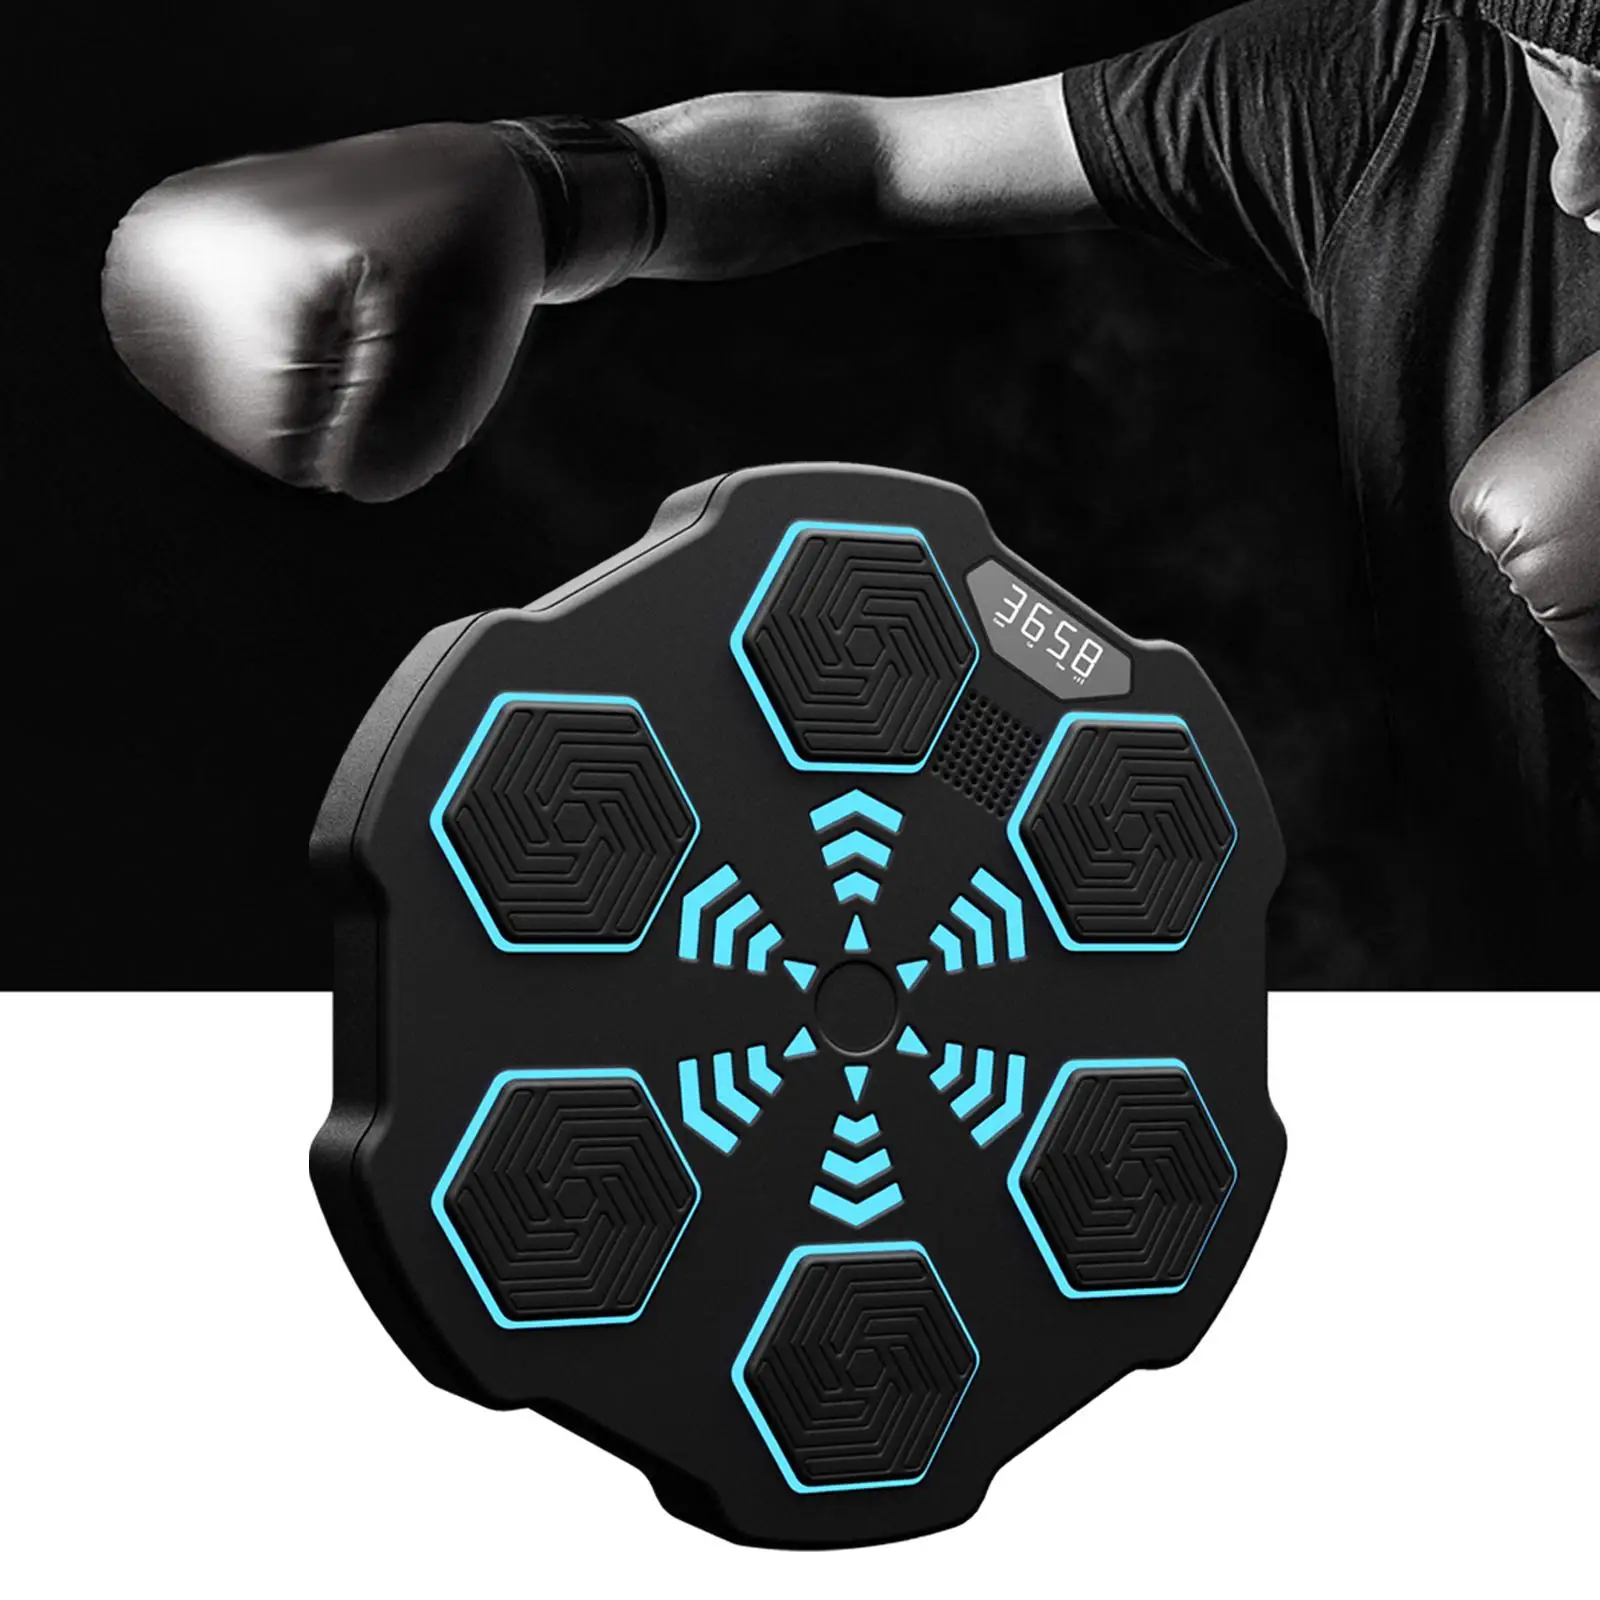 Electronic Wall Target Sandbag Music Boxing Machine with LED Lights for Competitions Trainer Practice Striking Skills Youth